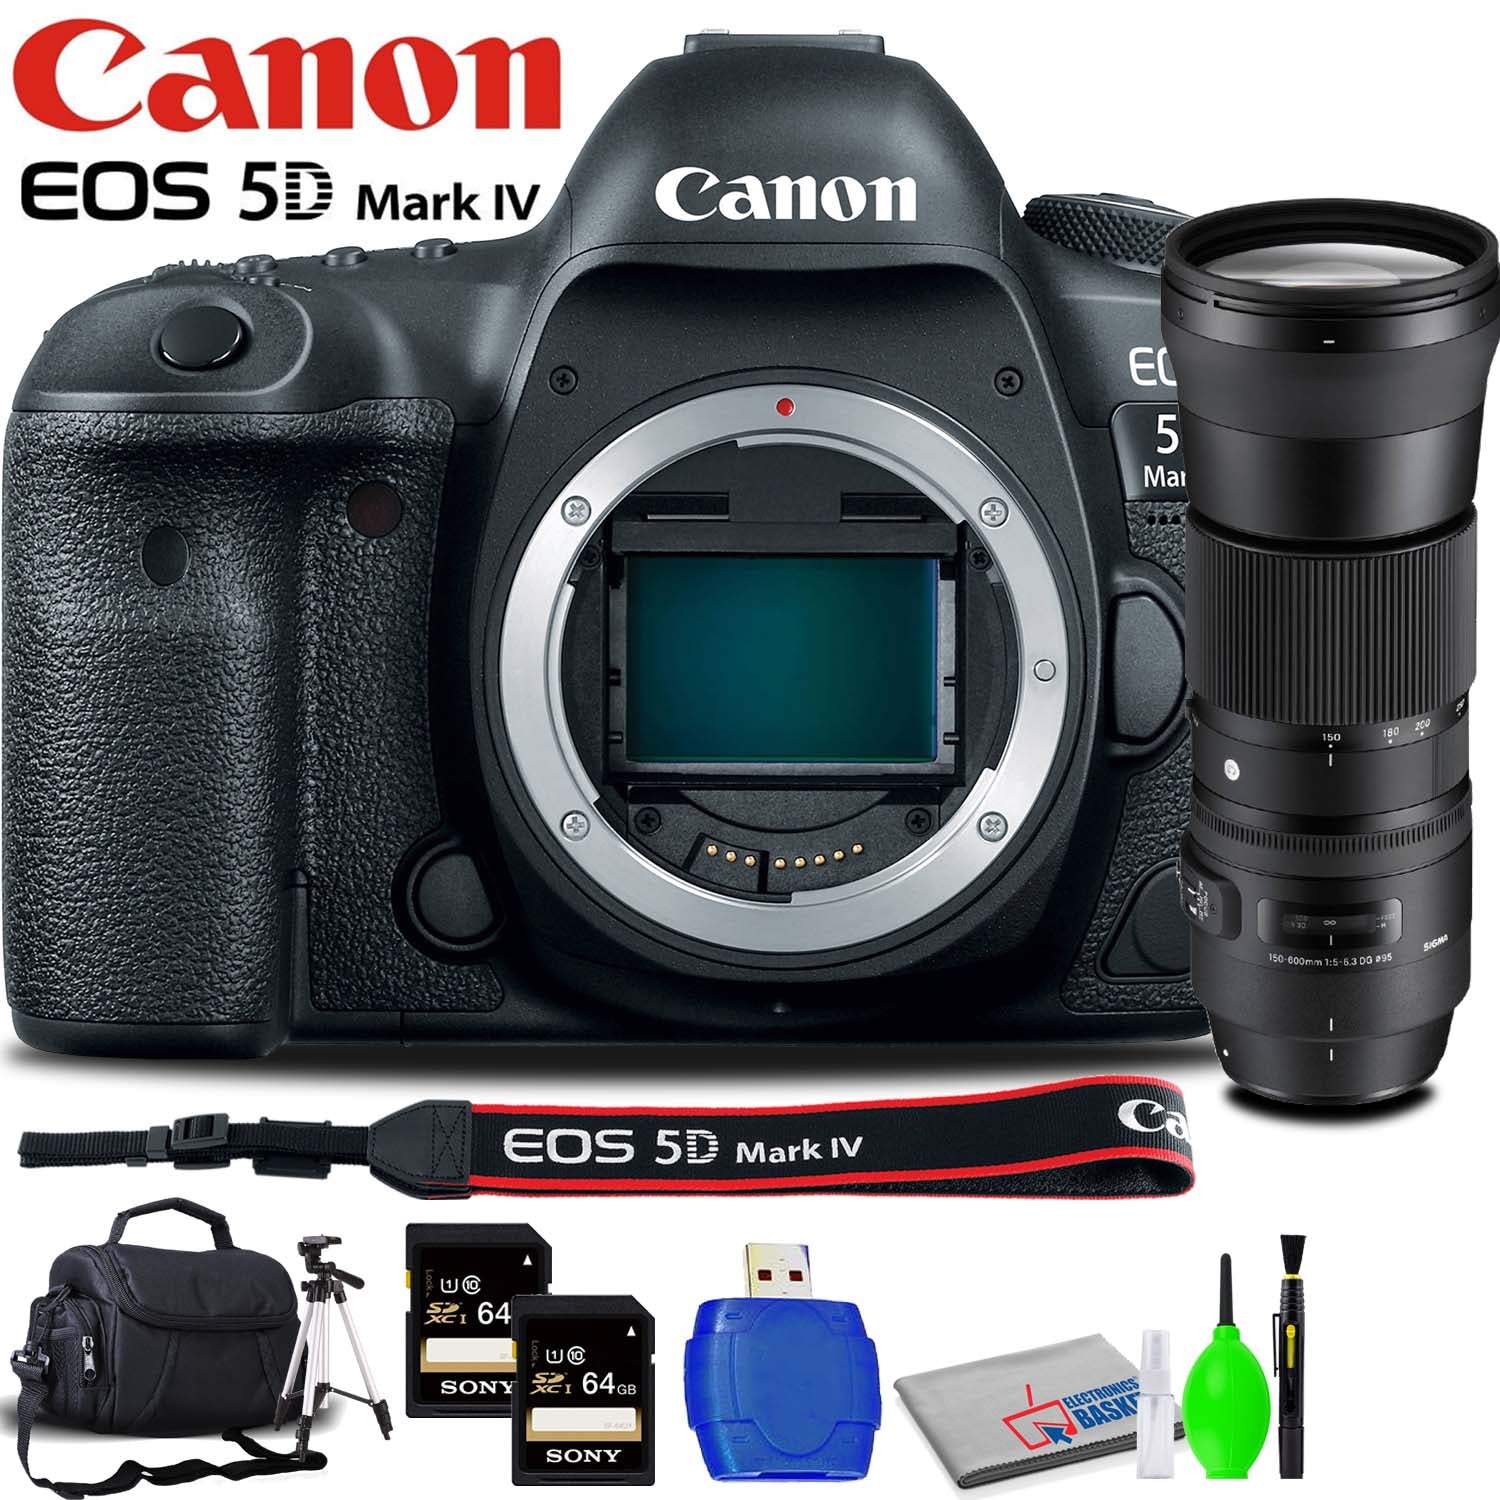 Canon EOS 5D Mark IV DSLR Camera (Body Only) Accessory Bundle with Sigma 150-600mm f/5-6.3 Lens, Memory Card Kit, Carrying Case